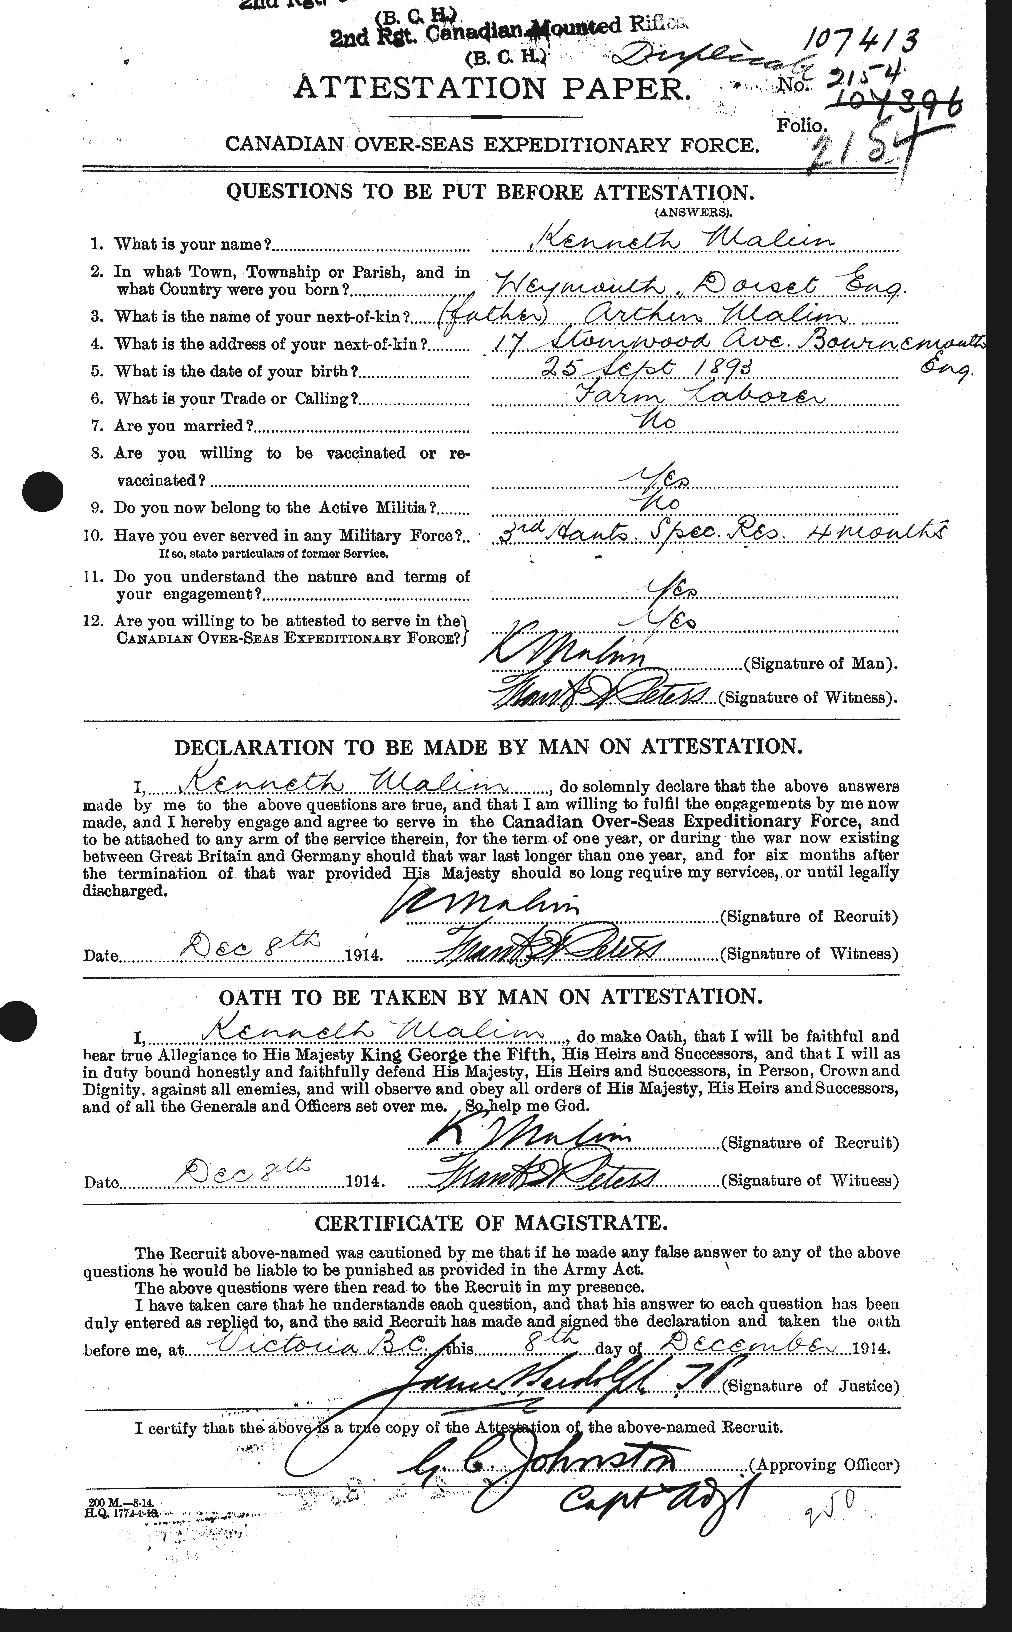 Personnel Records of the First World War - CEF 477404a